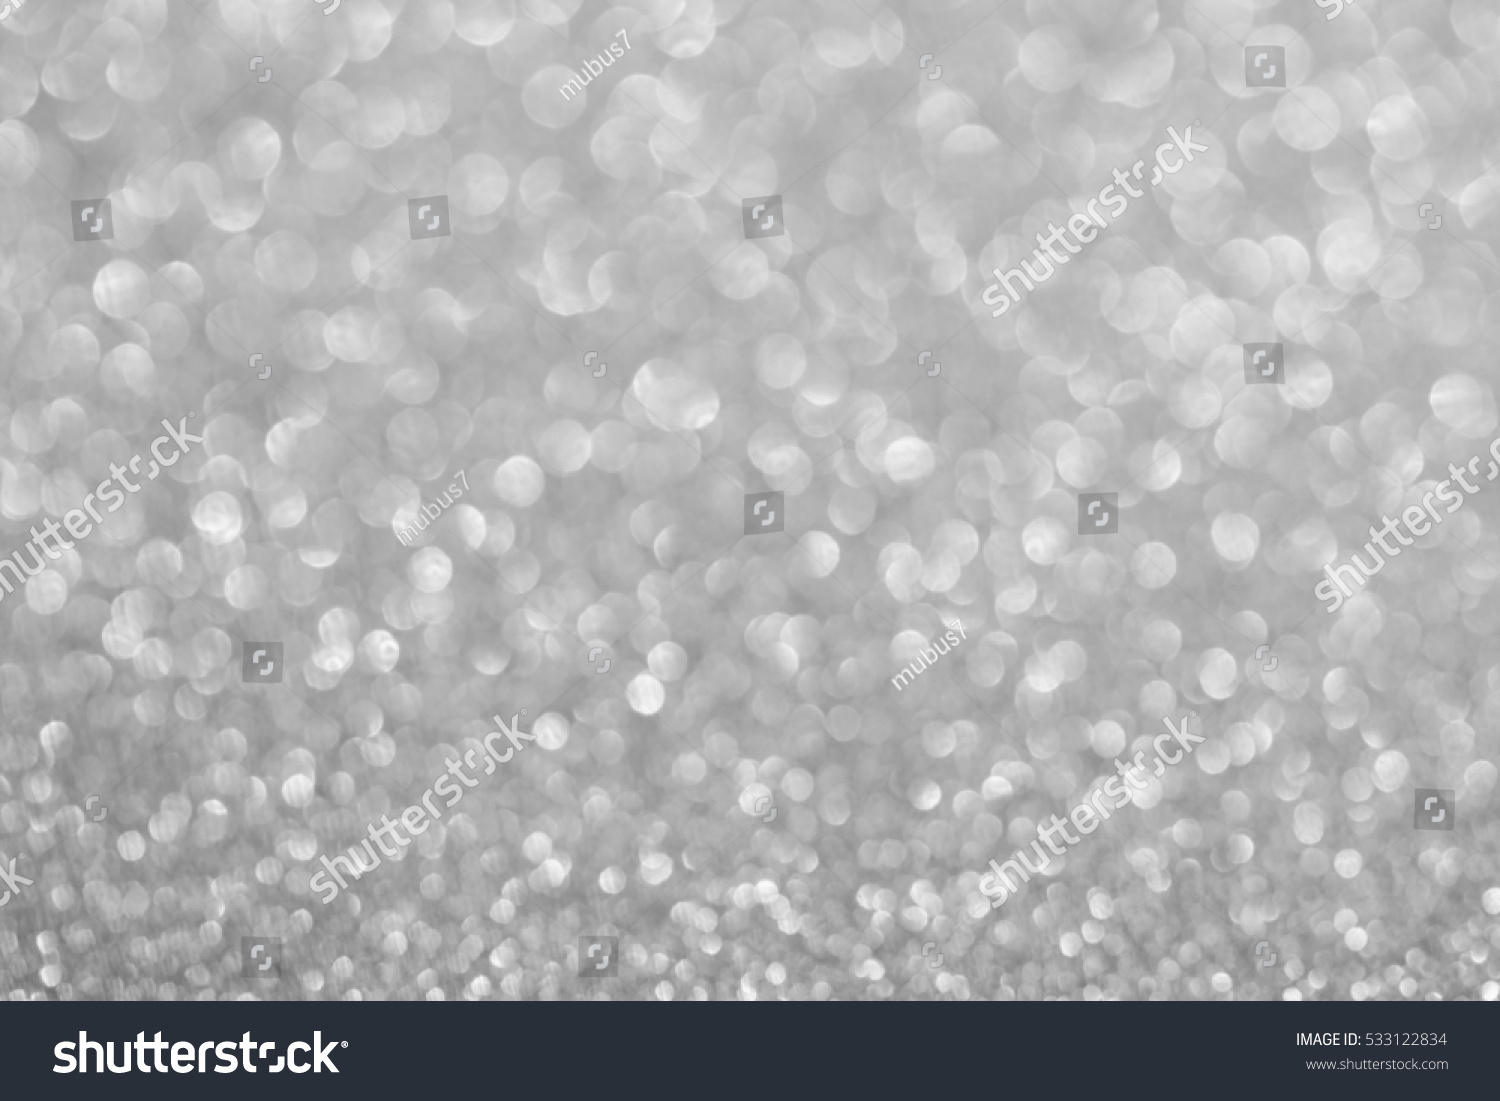 Abstract Glitter Lights Background. De-Focused Stock Photo 533122834 ...